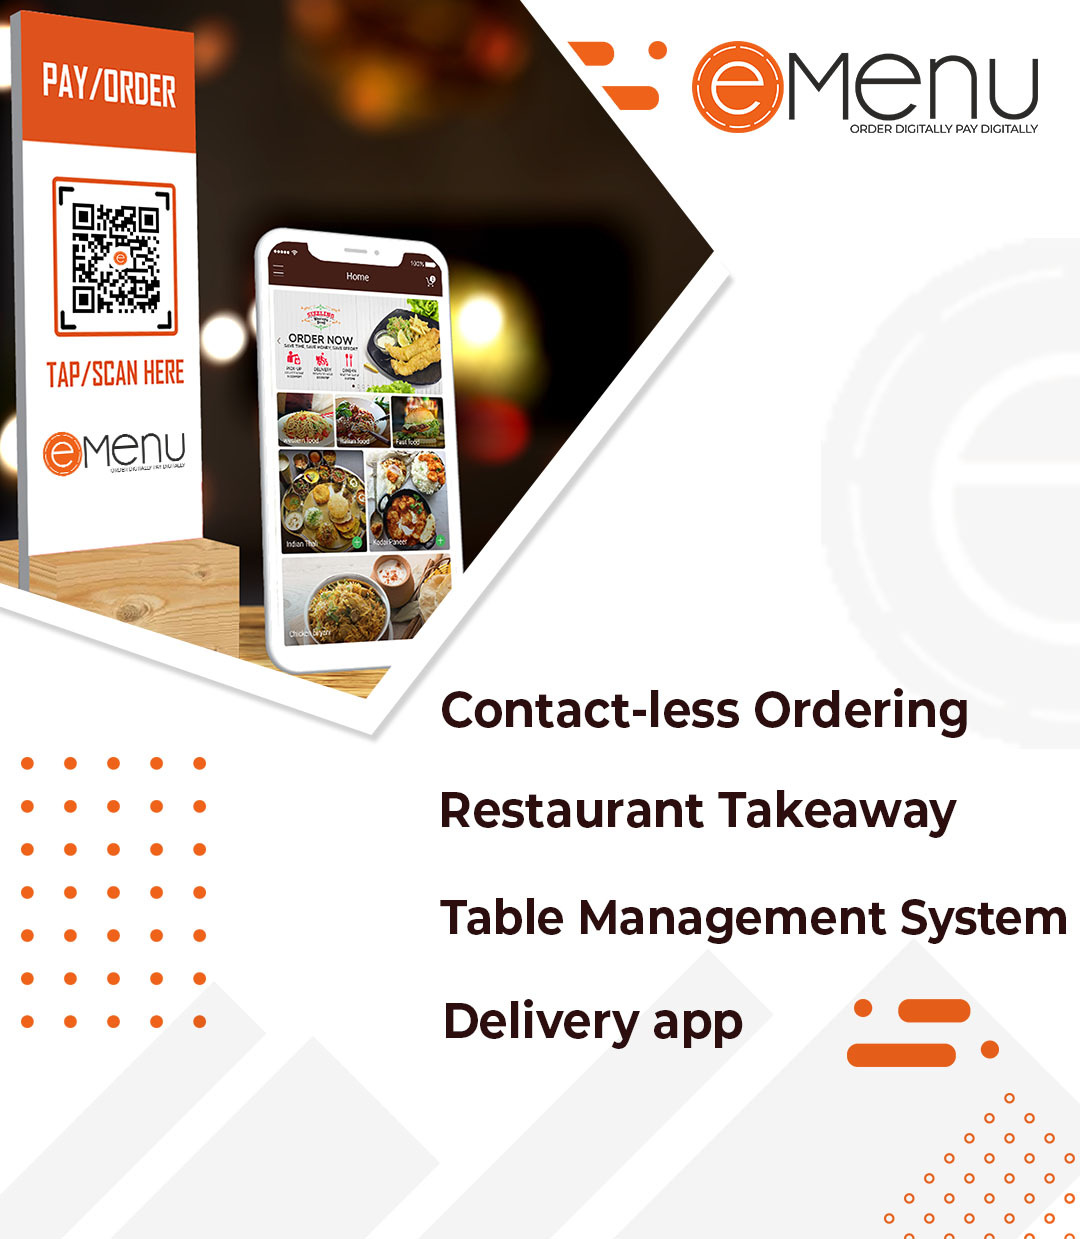 Grow your restaurant business with a automated ordering and management system